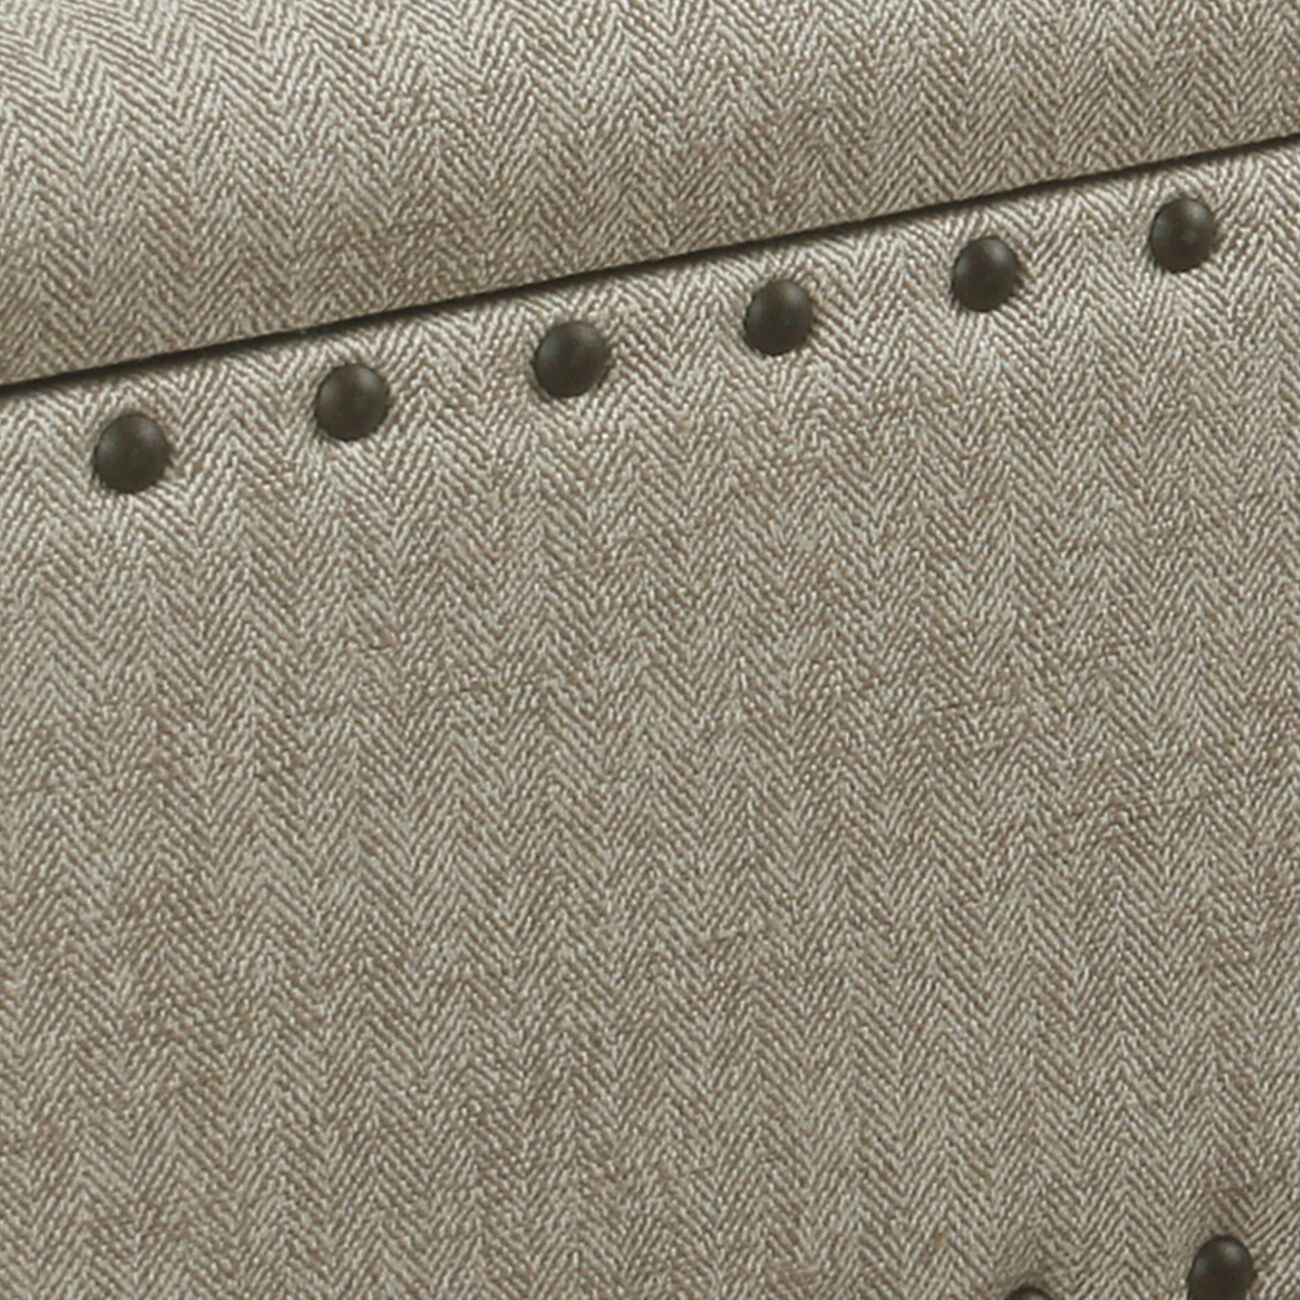 Textured Fabric Upholstered Wooden Storage Bench With Nail head Trim, Large, Beige and Brown